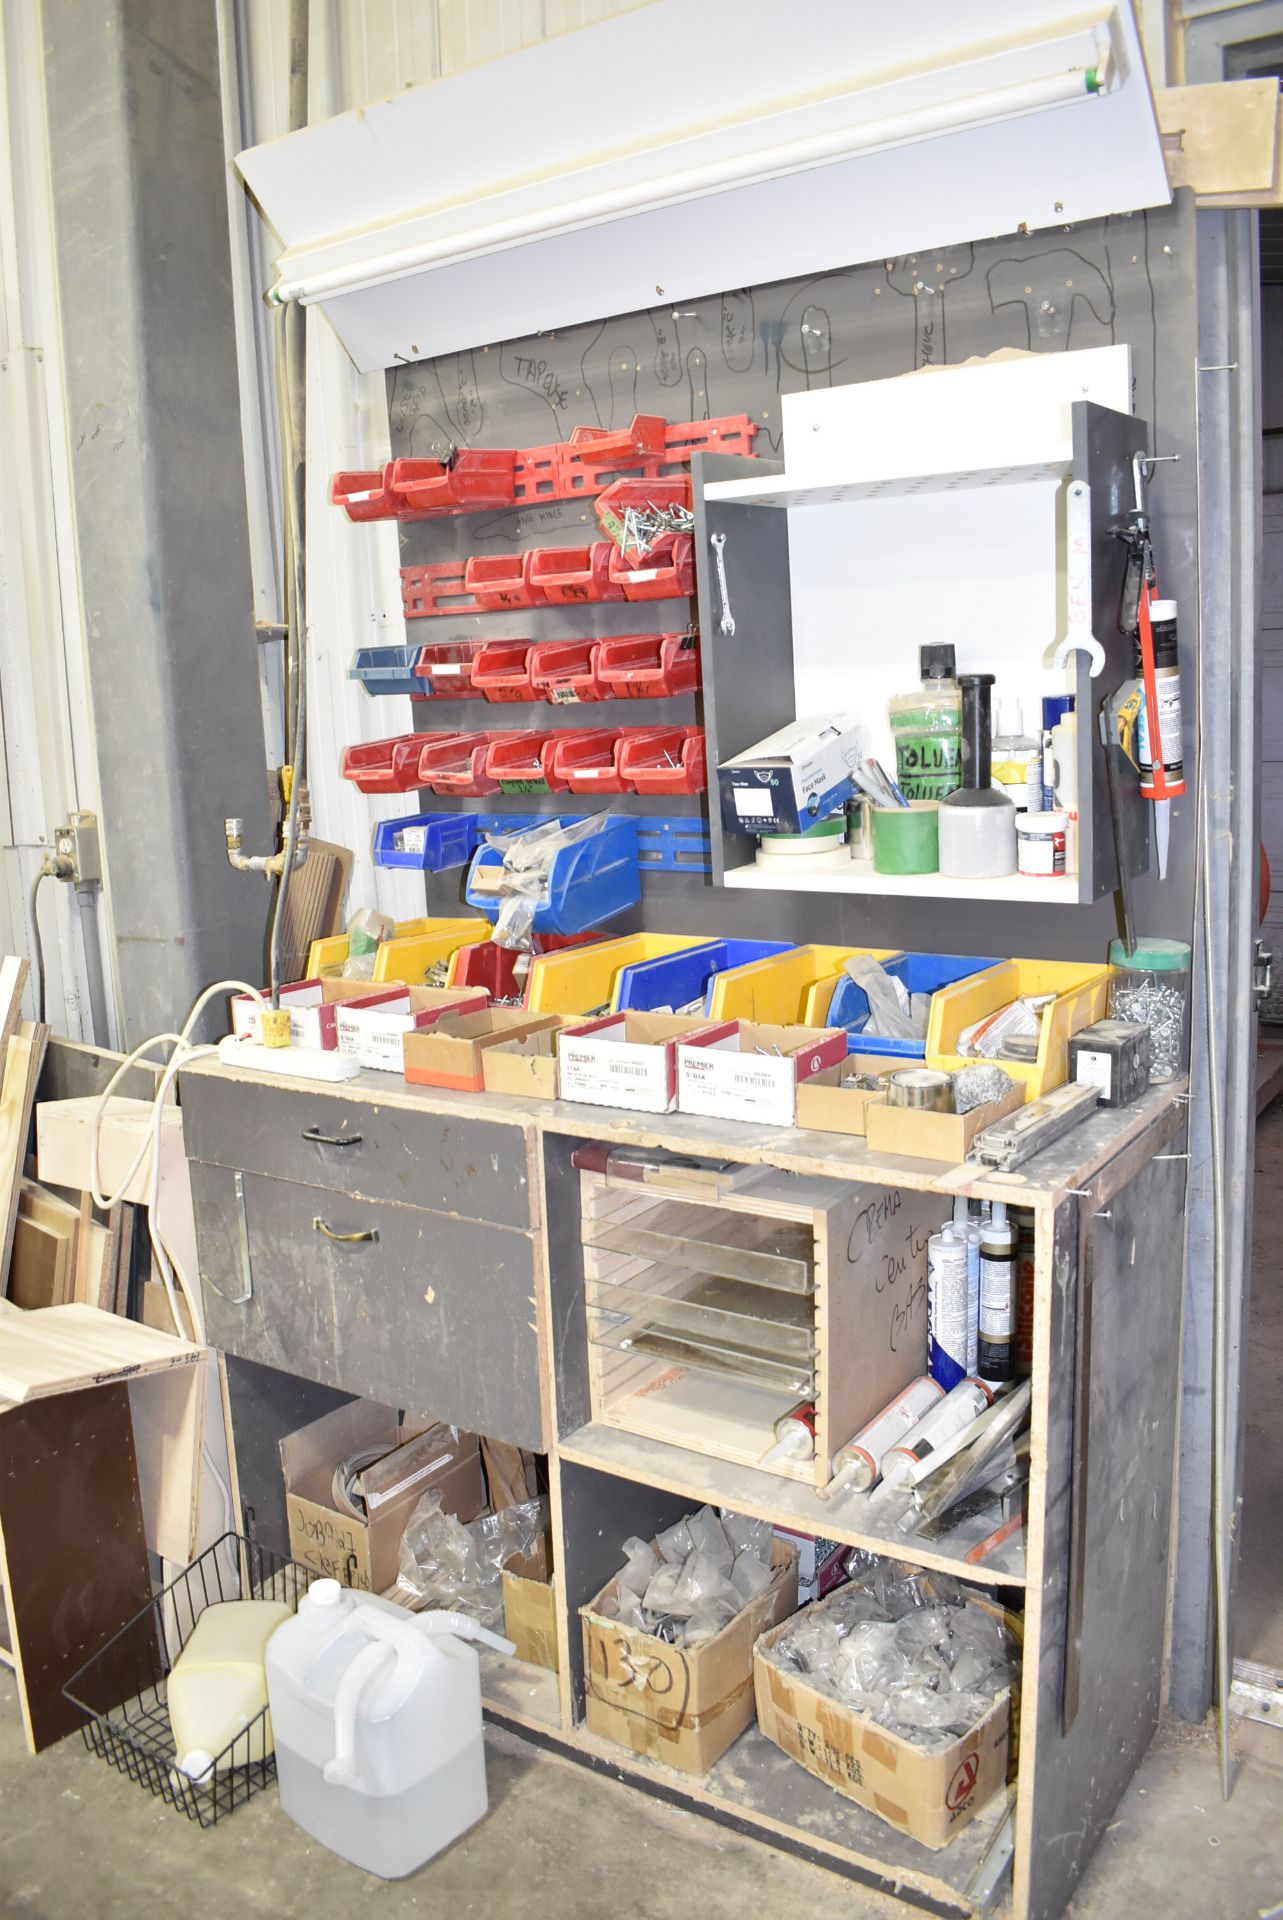 LOT/ CONTENTS ALONG WALL CONSISTING OF WORKBENCHES, TOOLS, HARDWARE, WOOD TRIM AND PANELS [RIGGING - Image 11 of 12